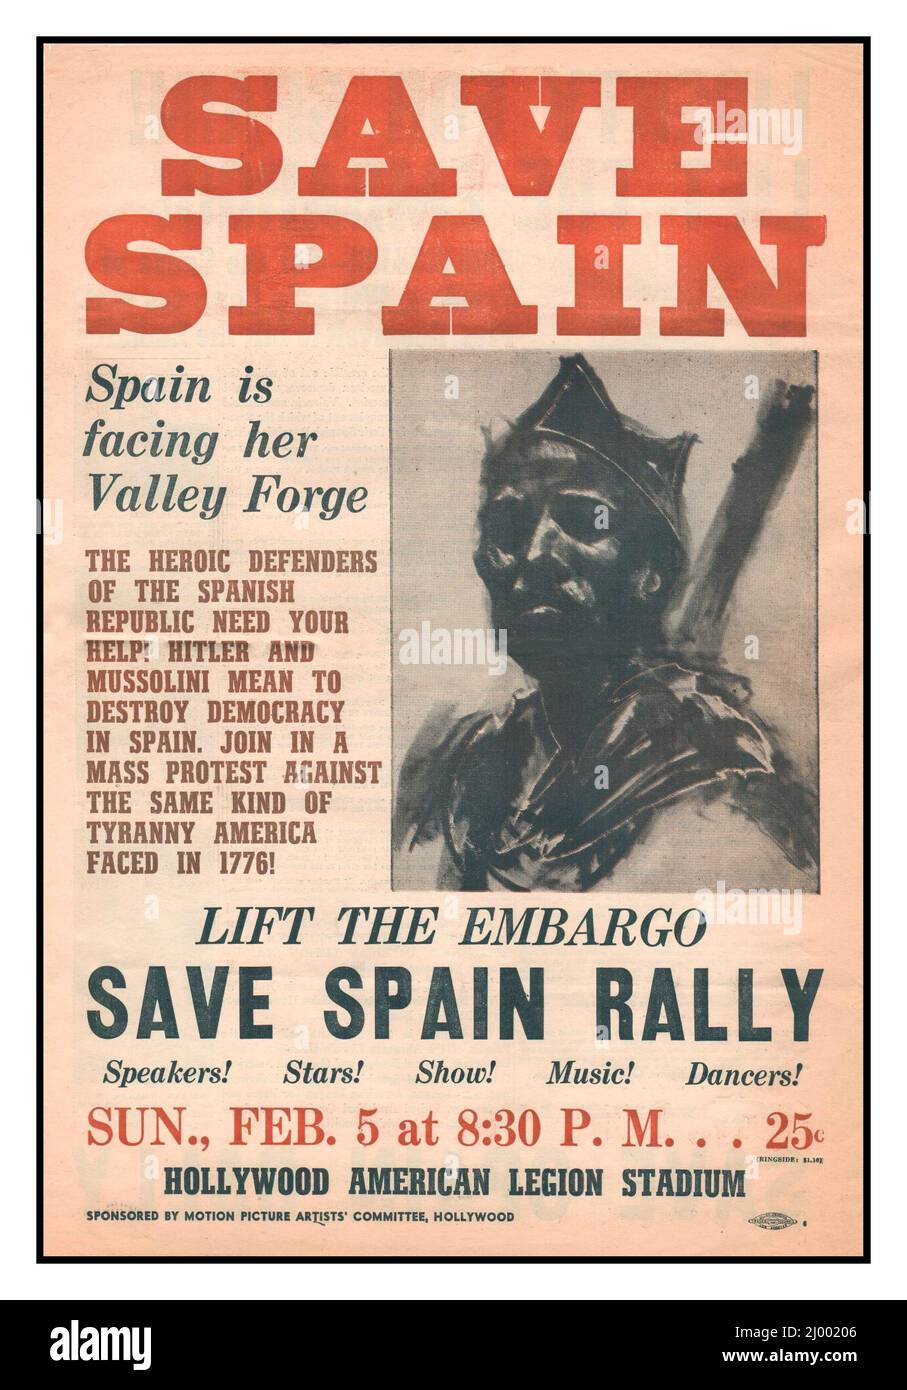 SPANISH CIVIL WAR Newpaper article 'Spain is Facing Her Valley Forge” America USA, 1930s German involvement in the Spanish Civil War commenced with the outbreak of the civil war in July 1936, with Adolf Hitler immediately sending in powerful air and armored units to assist General Francisco Franco and his Nationalist forces. The Soviet Union sent in smaller forces but a lot of modern weapons to assist the Republican government . Britain and France and two dozen other countries set up an embargo on any munitions or soldiers into Spain. Nazi Germany also signed the embargo but simply ignored it. Stock Photo